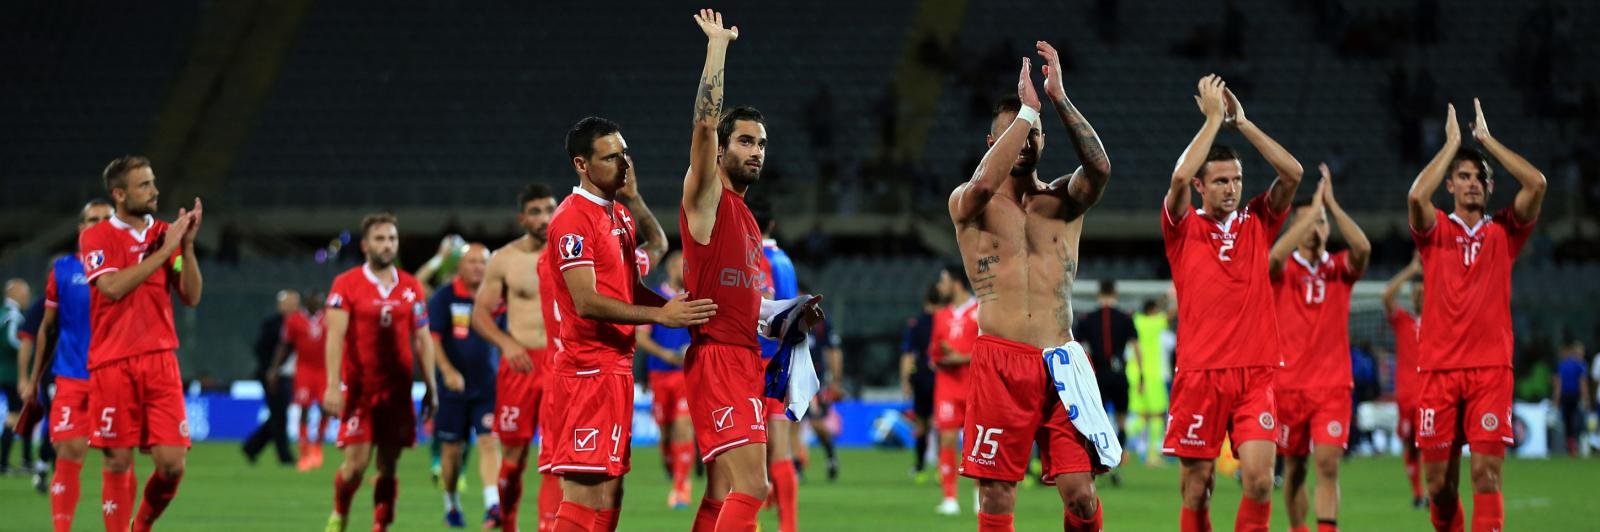 10 things you didn’t know about England’s opponents Malta